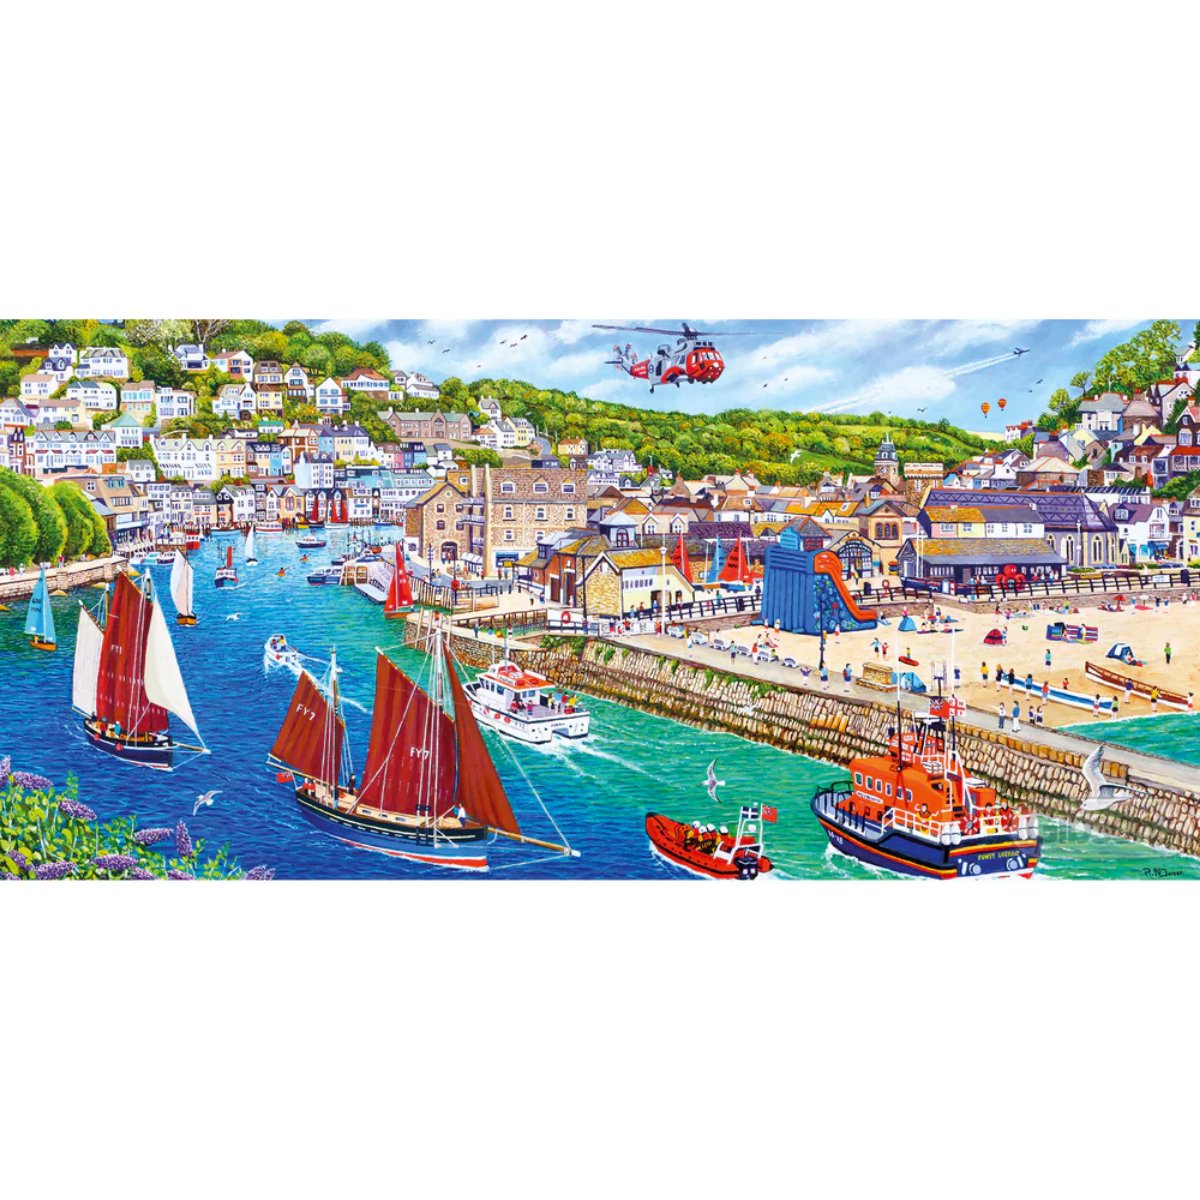 Gibsons Looe Harbour Jigsaw Puzzle (636 Pieces) - Phillips Hobbies